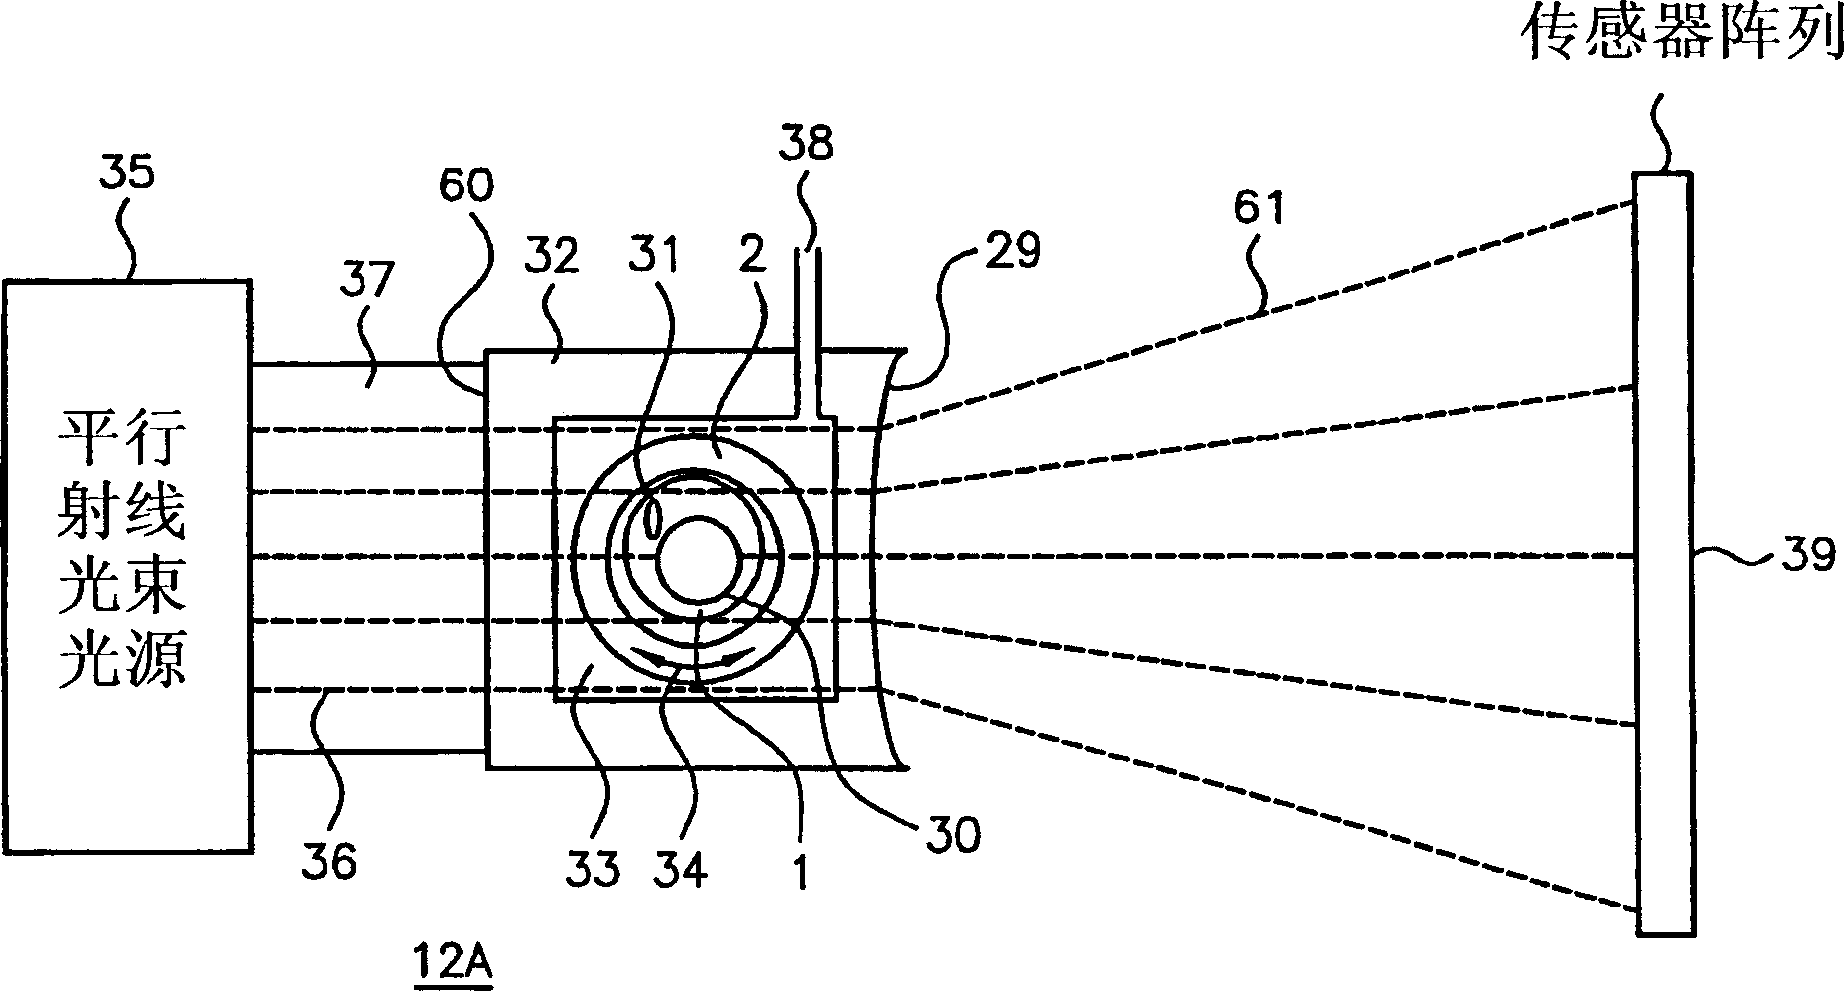 Optical tomography of small objects using parallel ray illumination and post-specimen optical magnification